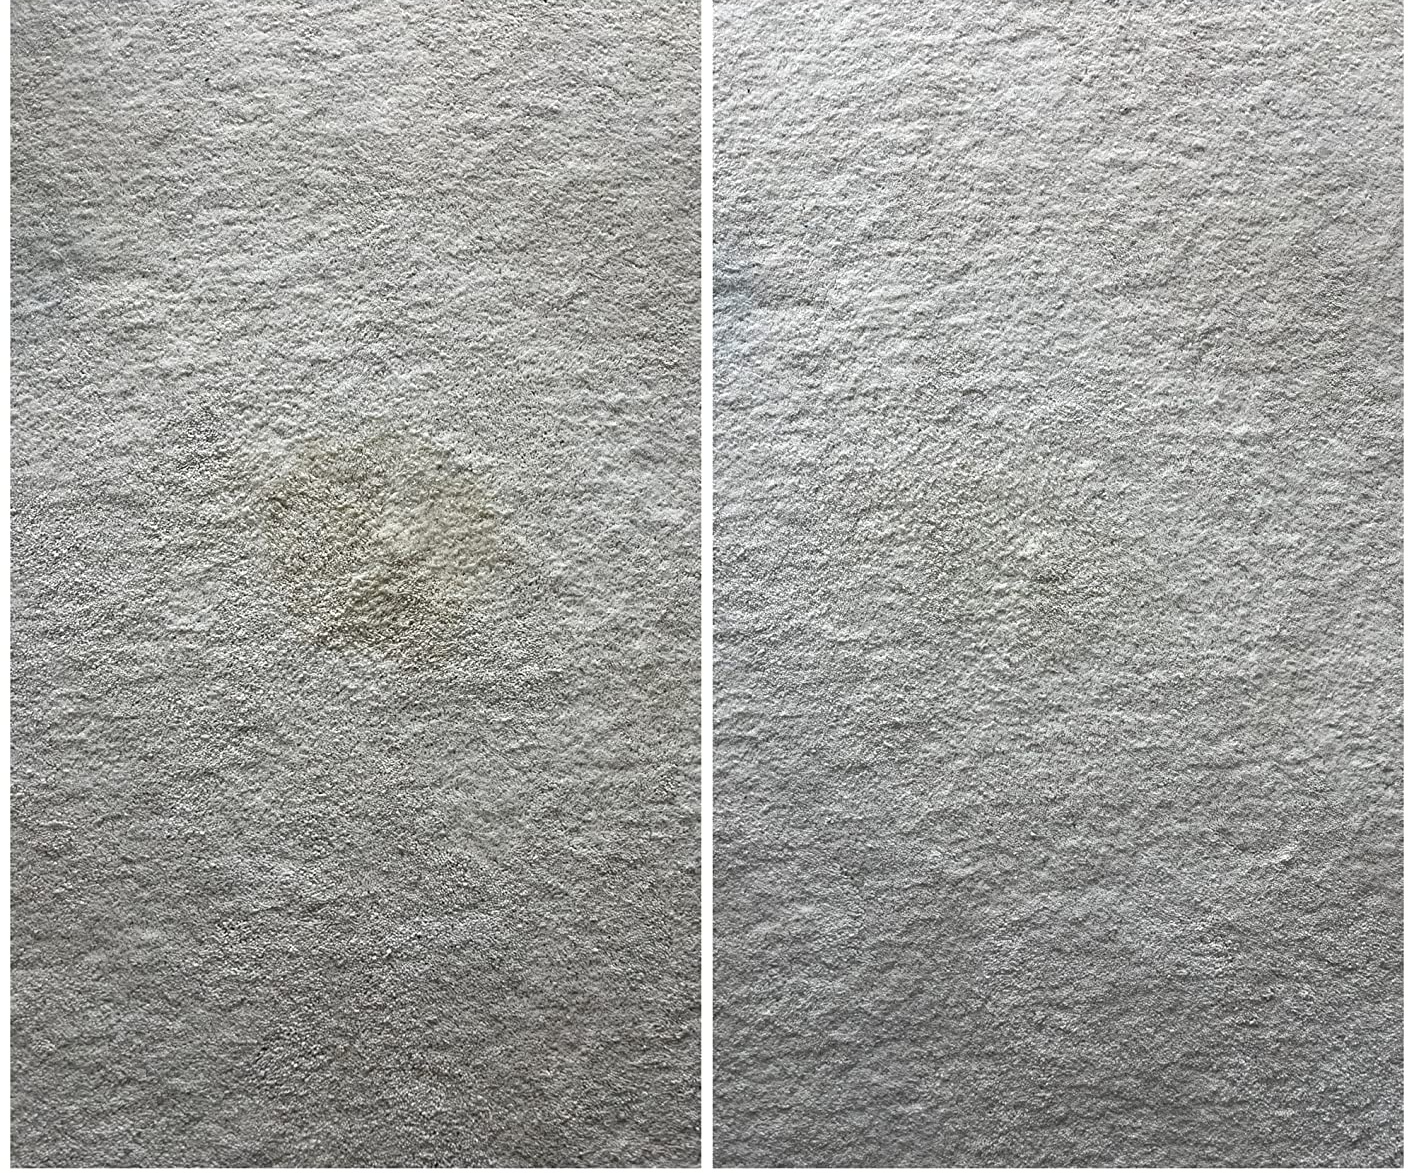 white carpet with stain, then the carpet completely clean